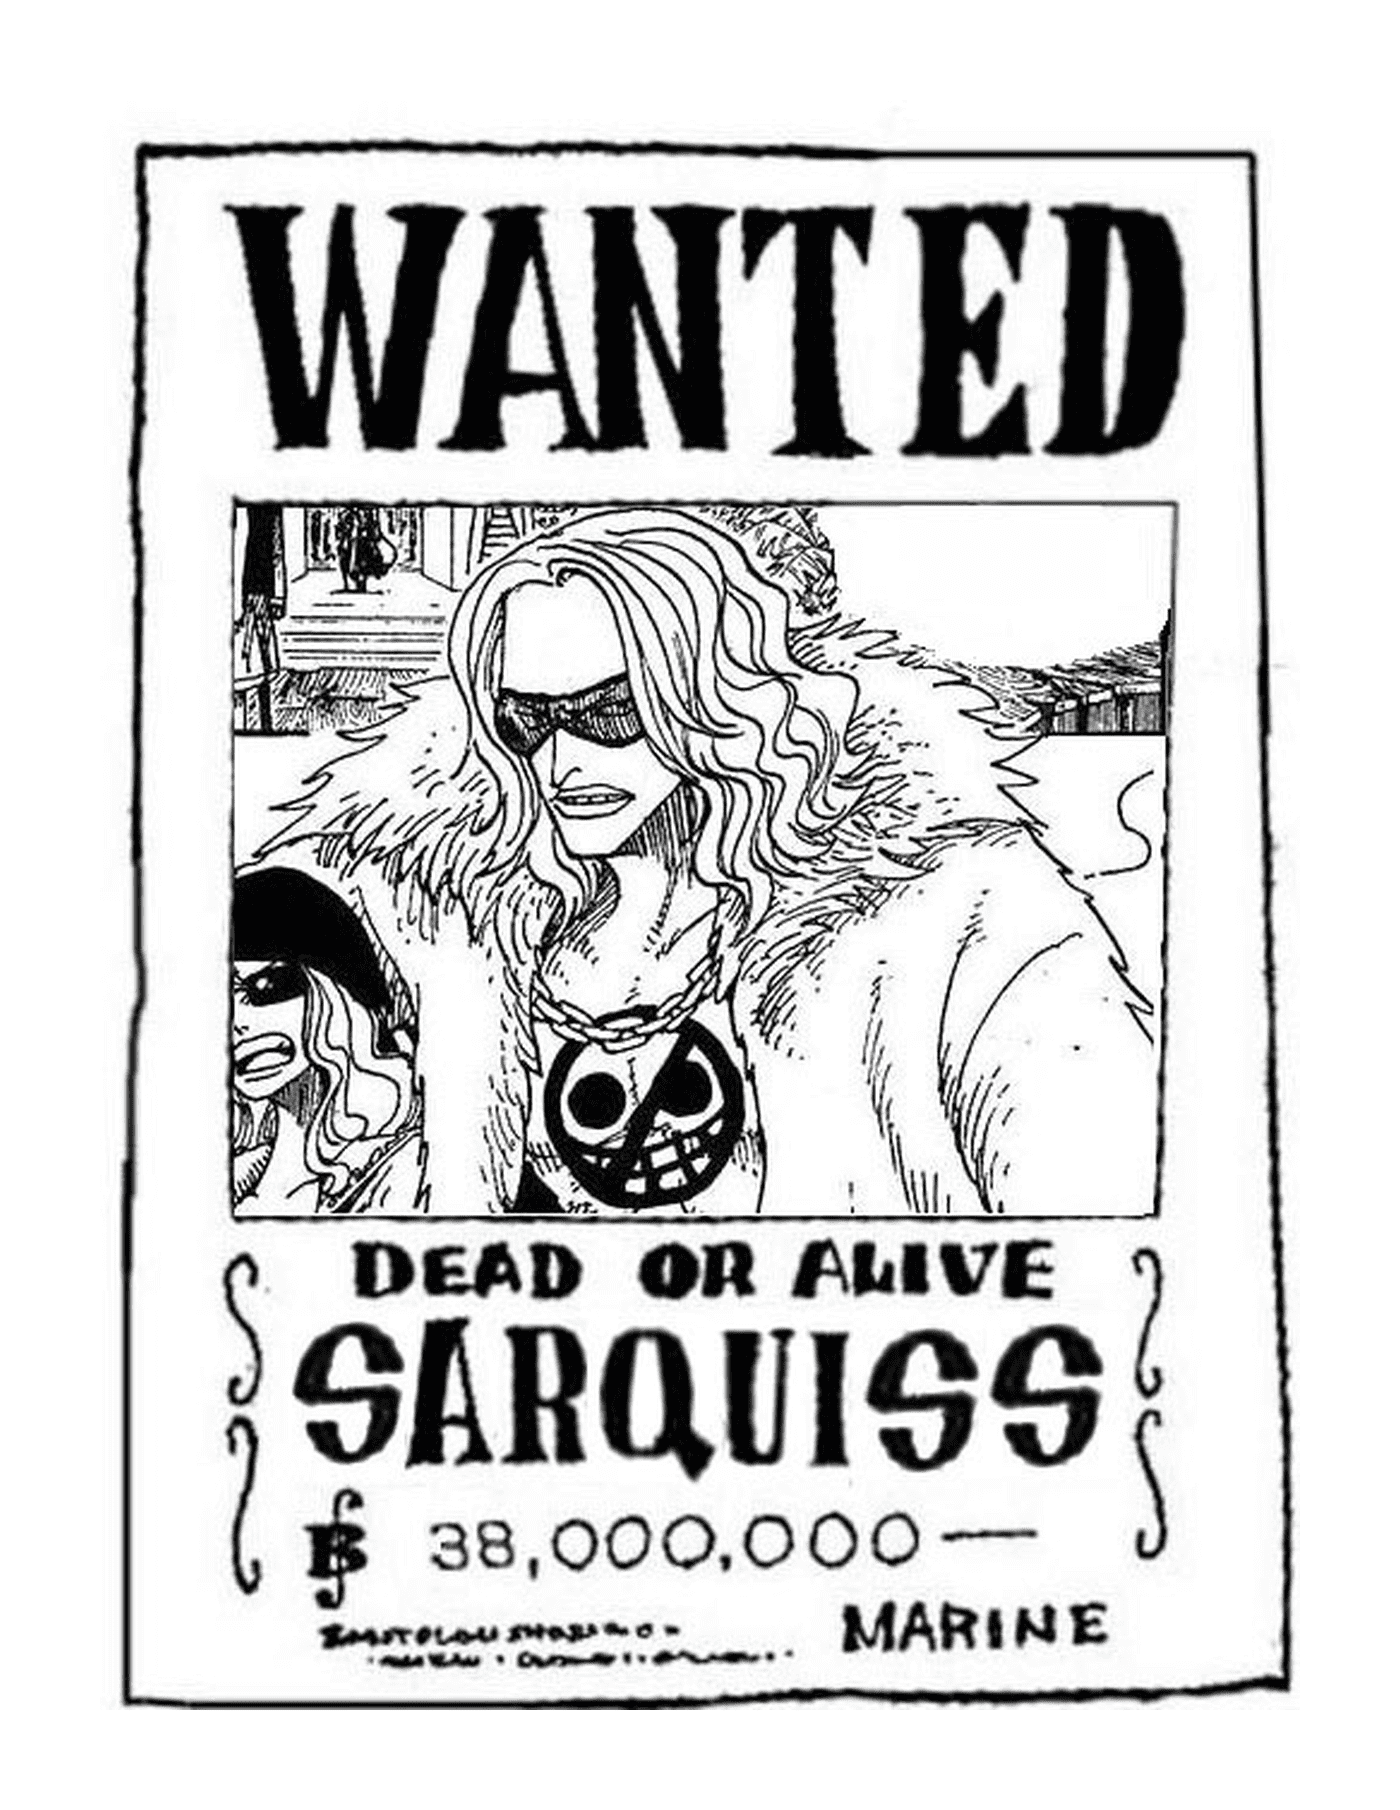  Wanted Sarquiss, dead or alive 